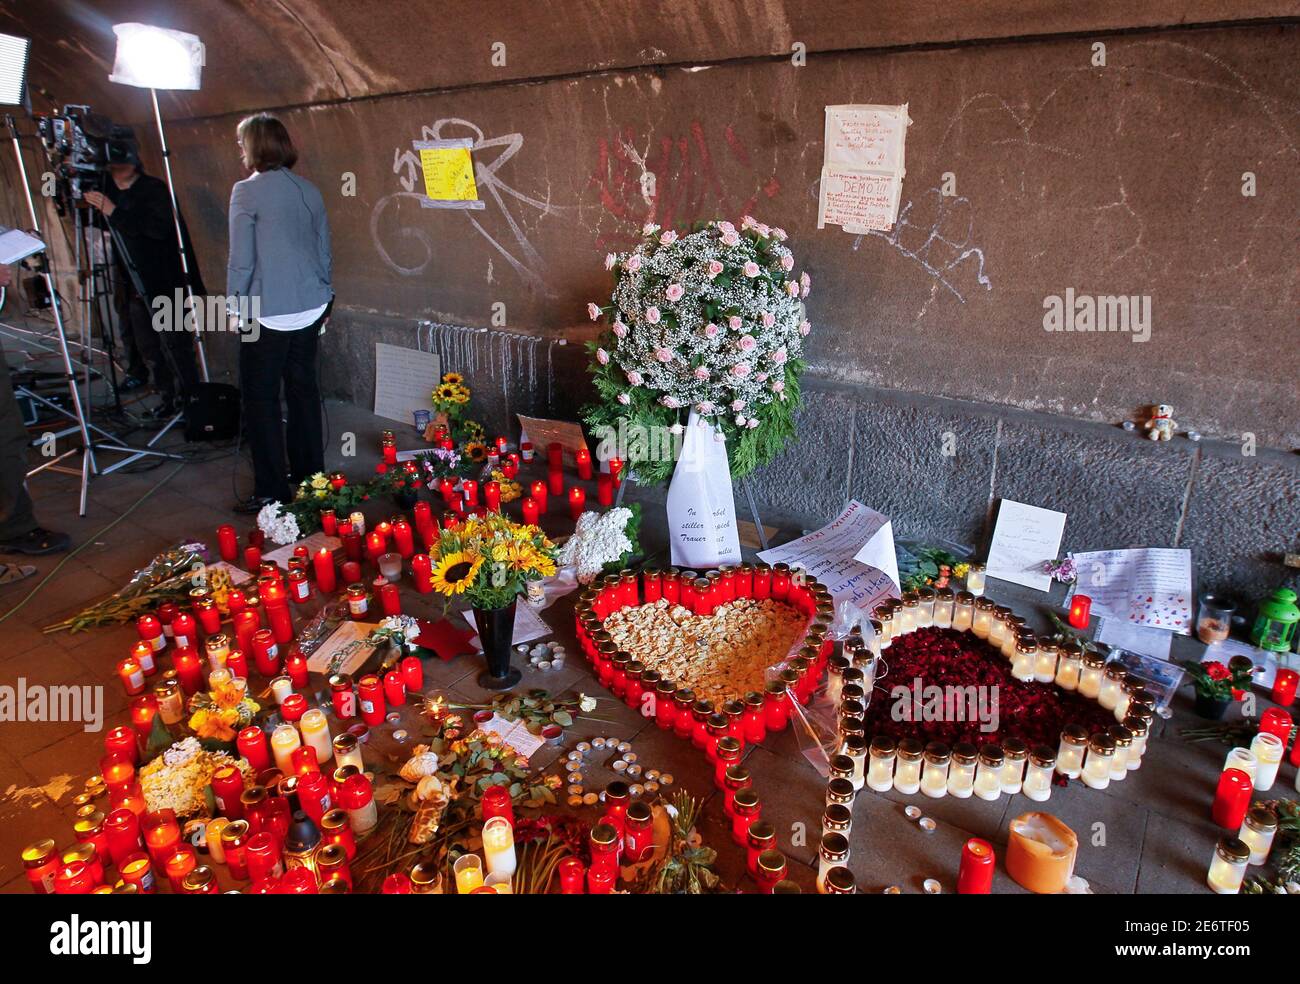 A TV journalist of Germany's public broadcaster Zweites Deutsches Fernsehen (ZDF) waits for the live-broadcast in front of flowers and candles in a tunnel in Duisburg July 27, 2010, near the site where 'Love Parade' goers died in the western German city of Duisburg on Saturday. Police warnings about the dangers of holding the Love Parade in the German city of Duisburg were not heeded, the police union chief said on Monday, as the death toll from a stampede at the event rose to 20. The revellers died when panic broke out at the techno music festival on Saturday in the western city near the Dutc Stock Photo